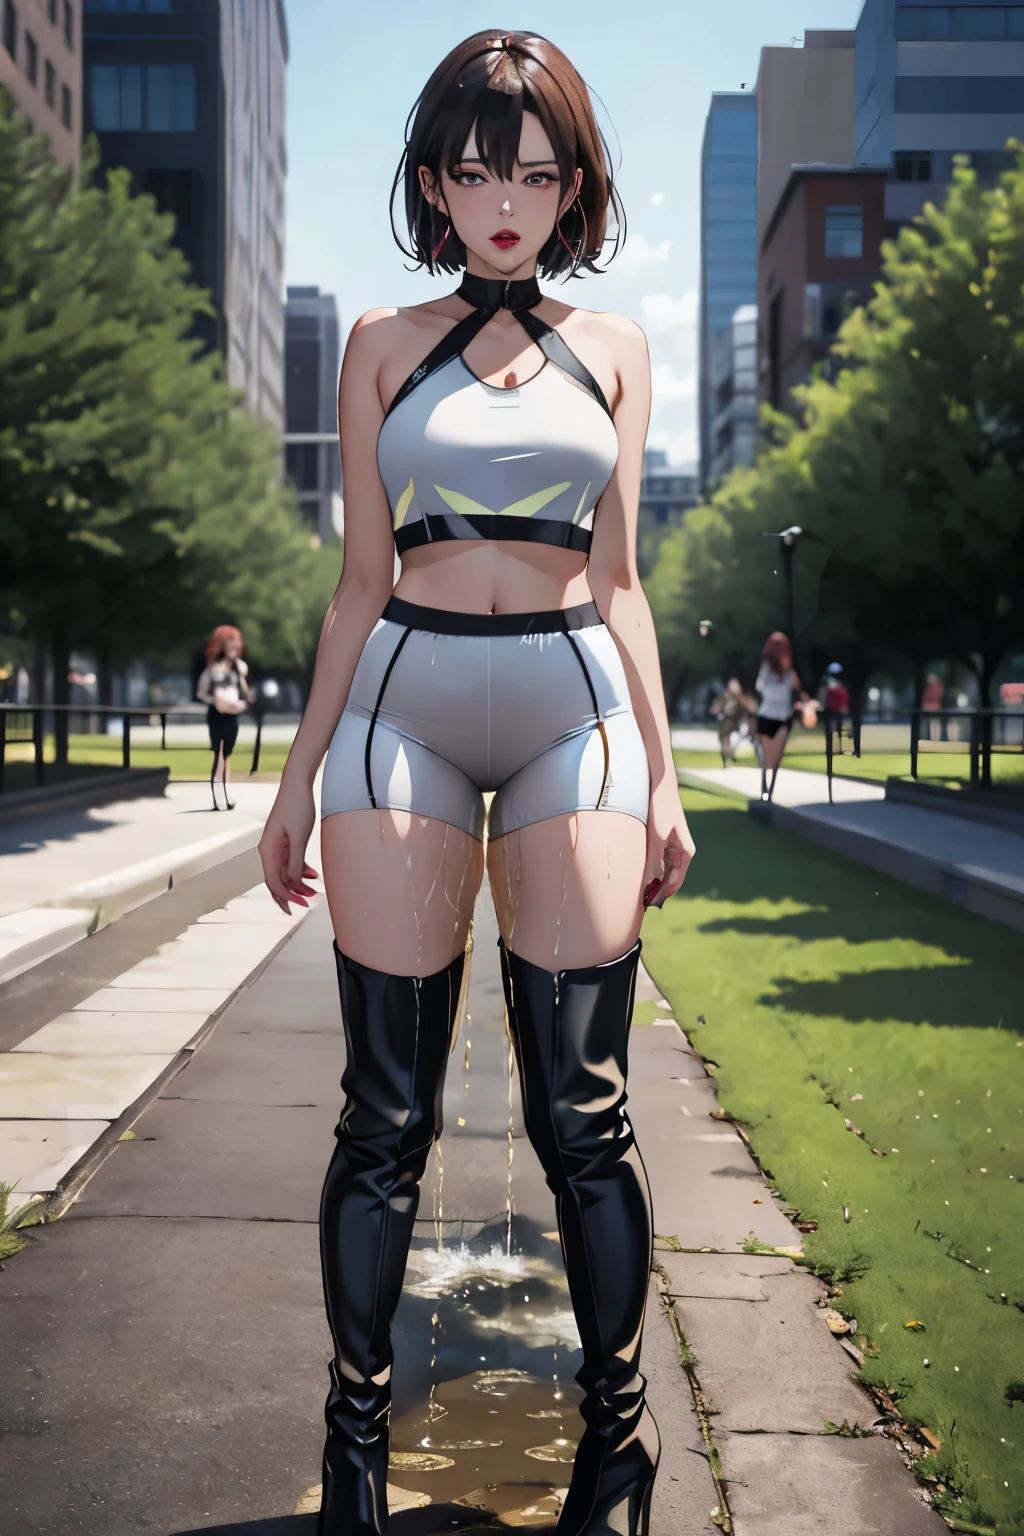 highres, beautiful women, high detail, good lighting, lewd, hentai, (((cycling shorts))), (leather halter top), (bare midriff), (cameltoe), (((leather thigh high heel boots))), (bare thighs), (wet shorts), (((wetting herself))), (((peeing herself))), pee streaming down legs, peeing stain, (puddle), (thick thighs), nice long legs, lipstick, pretty face, (full body shot), ((in city park together with group of many beautiful lesbian women holding each other))